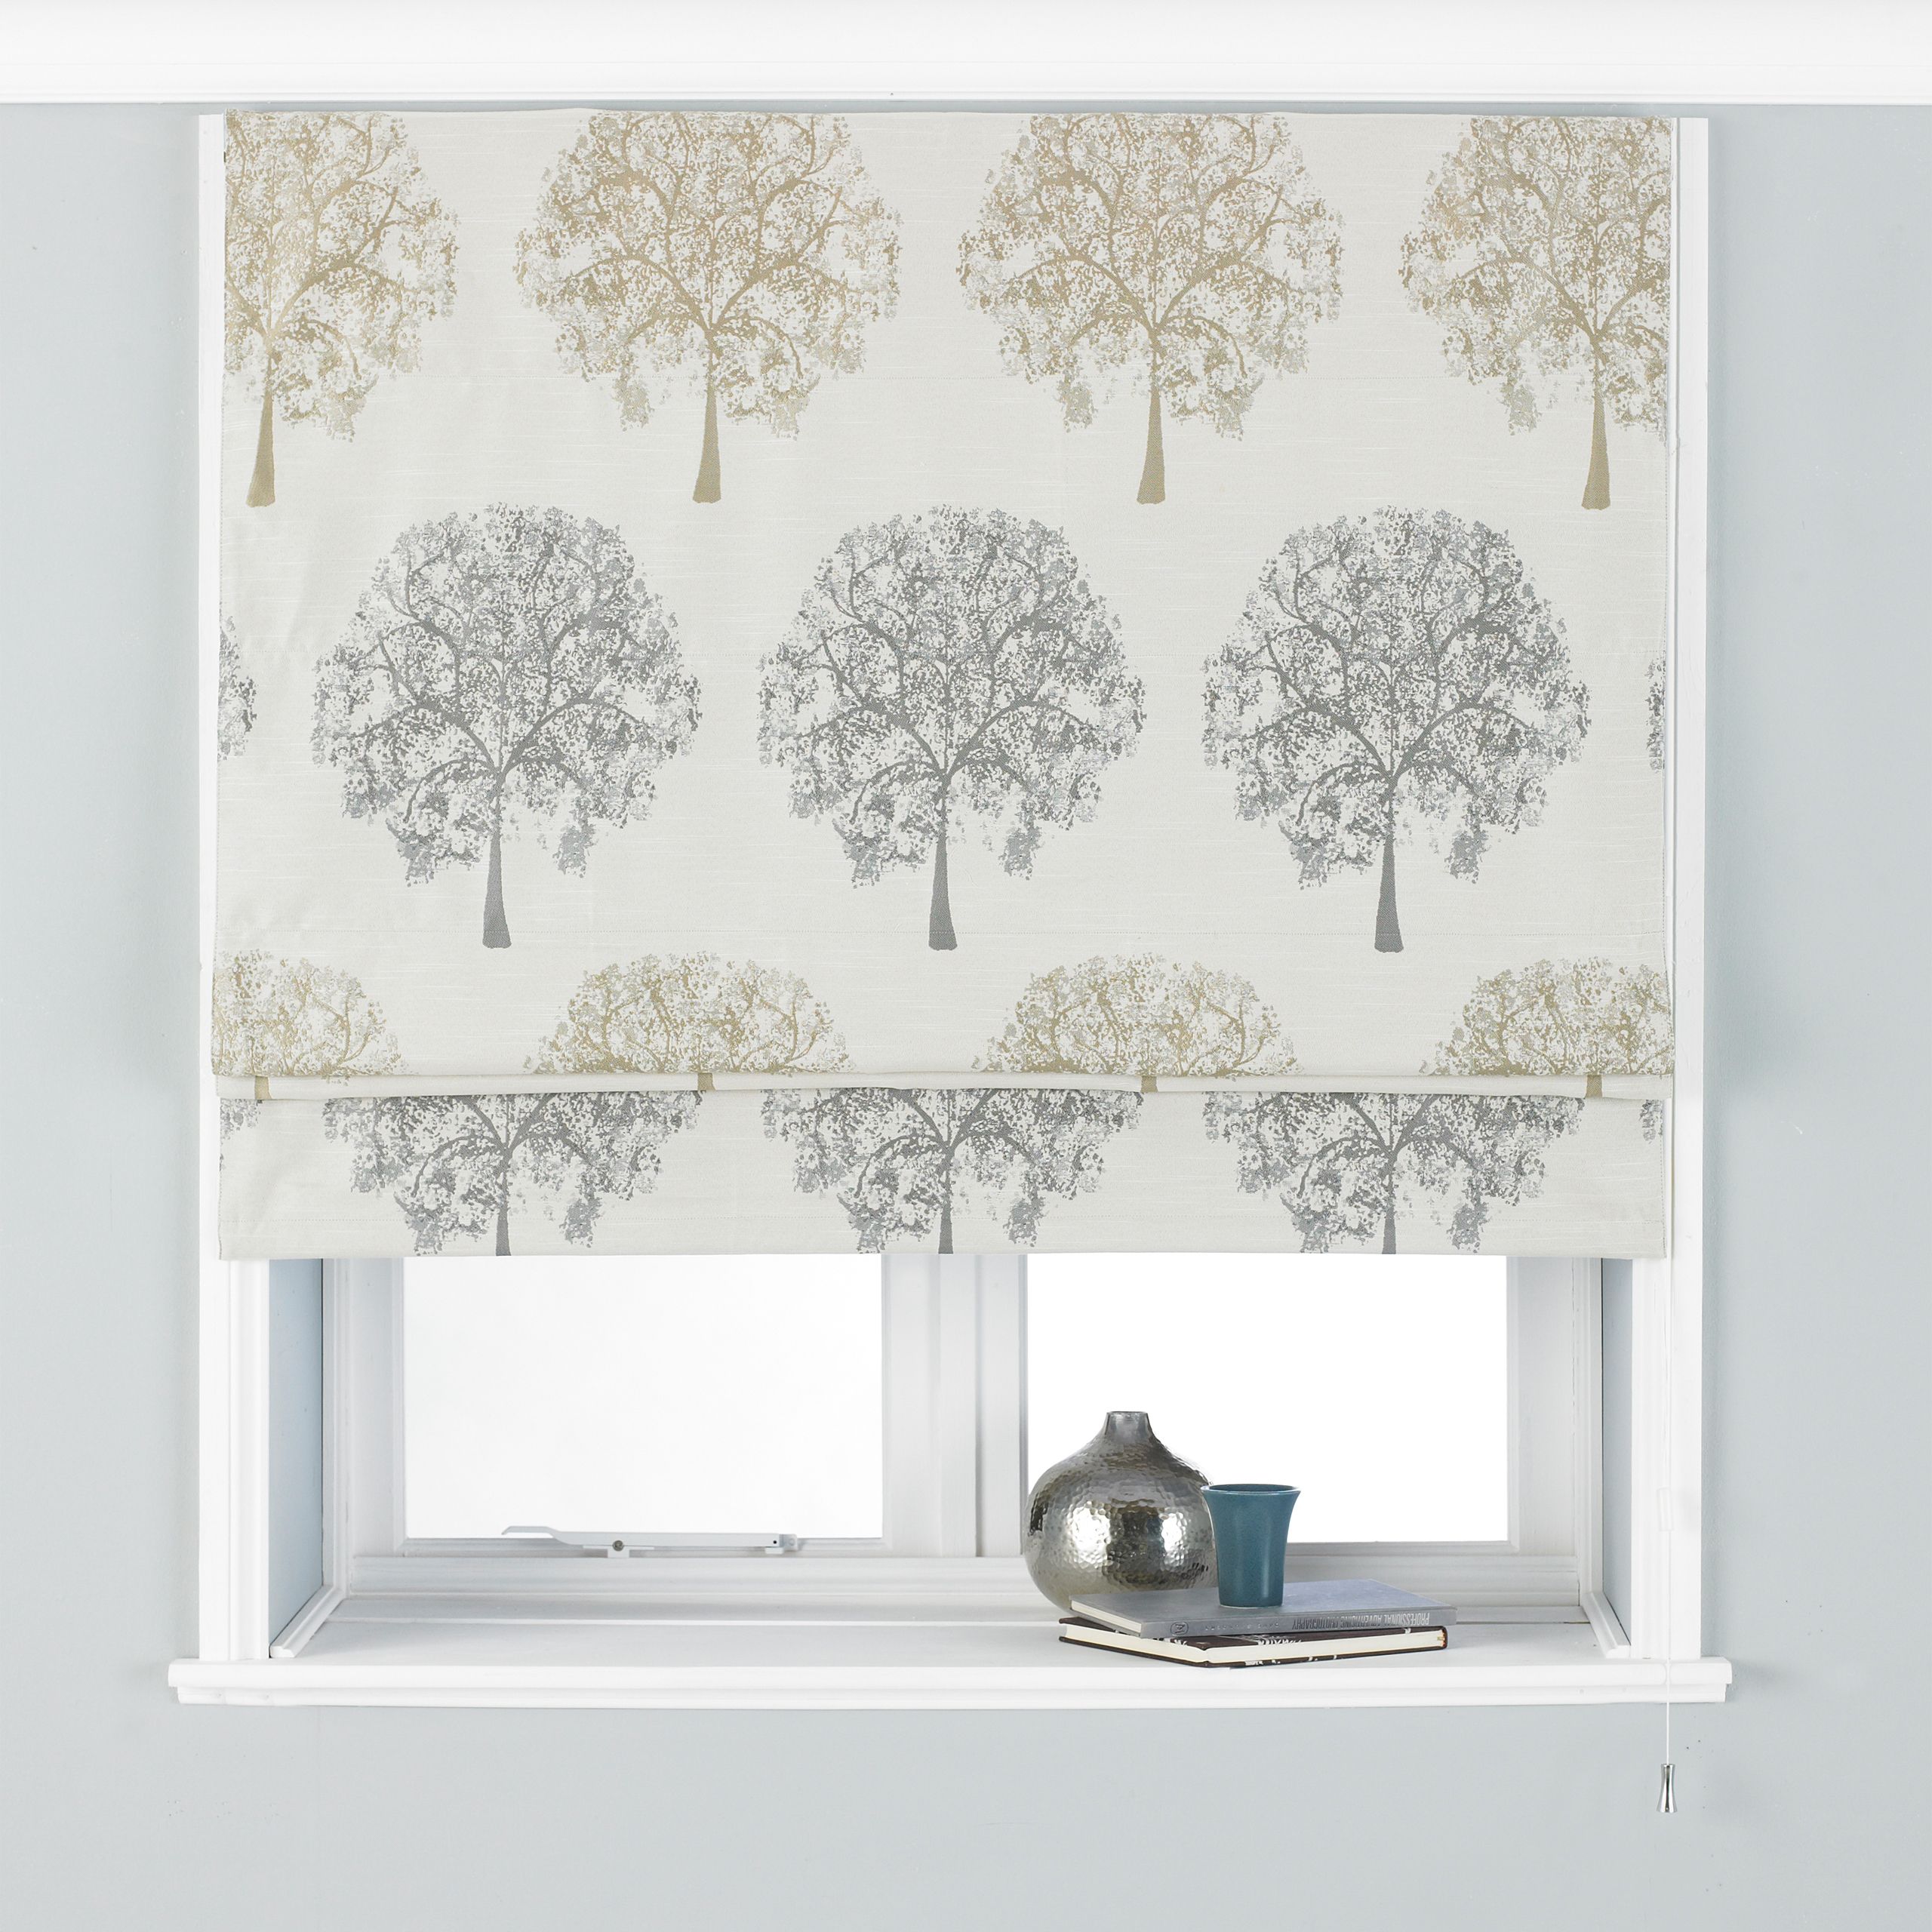 The Oakdale roman blinds feature a timeless design of oaktree motifs. The blinds have a total blackout lining for guaranteed darkness. These blinds are made of 100% robust polyester. Perfect for bedrooms these versatile blinds will ensure you have a great nights sleep whilst also keeping you cool in summer and warm in winter. Each Oakdale blind has an adjustable cord with a built-in child-safety device making it the ideal choice for young families. Clear instructions are included as well as fixing brackets, screws and wall plugs for easy installation.